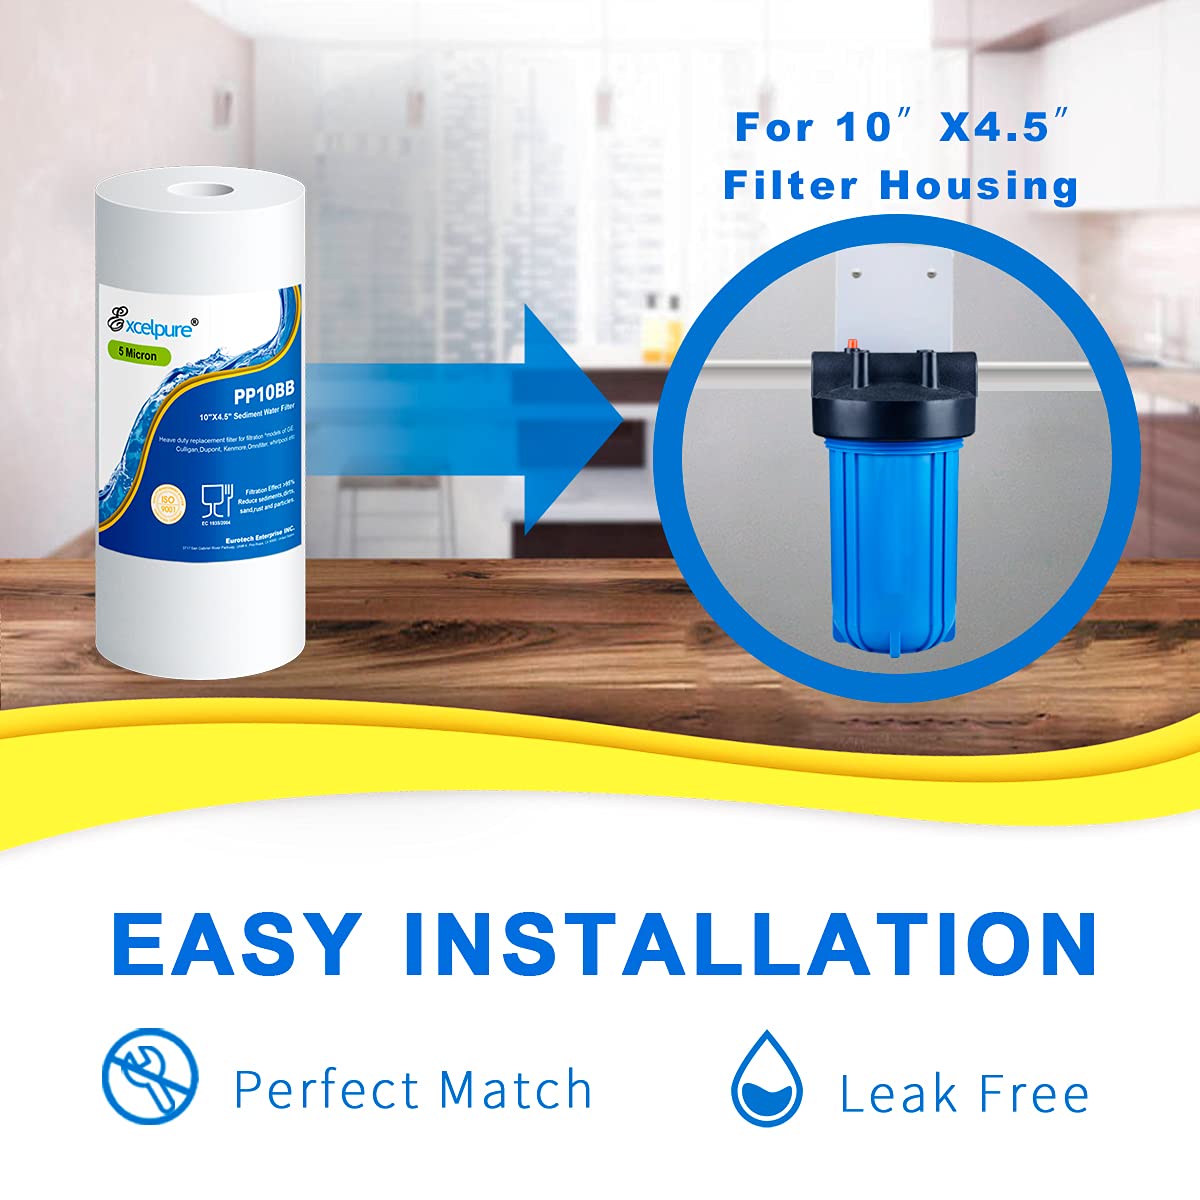 EXCELPURE Whole house Sediment Water Filter 10" x 4.5" (5 micron）Compatible with Culligan RFC-BBSA , WFHD13001B, GXWH35F, GXWH30C, 3M Aqua-Pure AP817,Whirlpool WHKF-GD25BB (2 PACK)